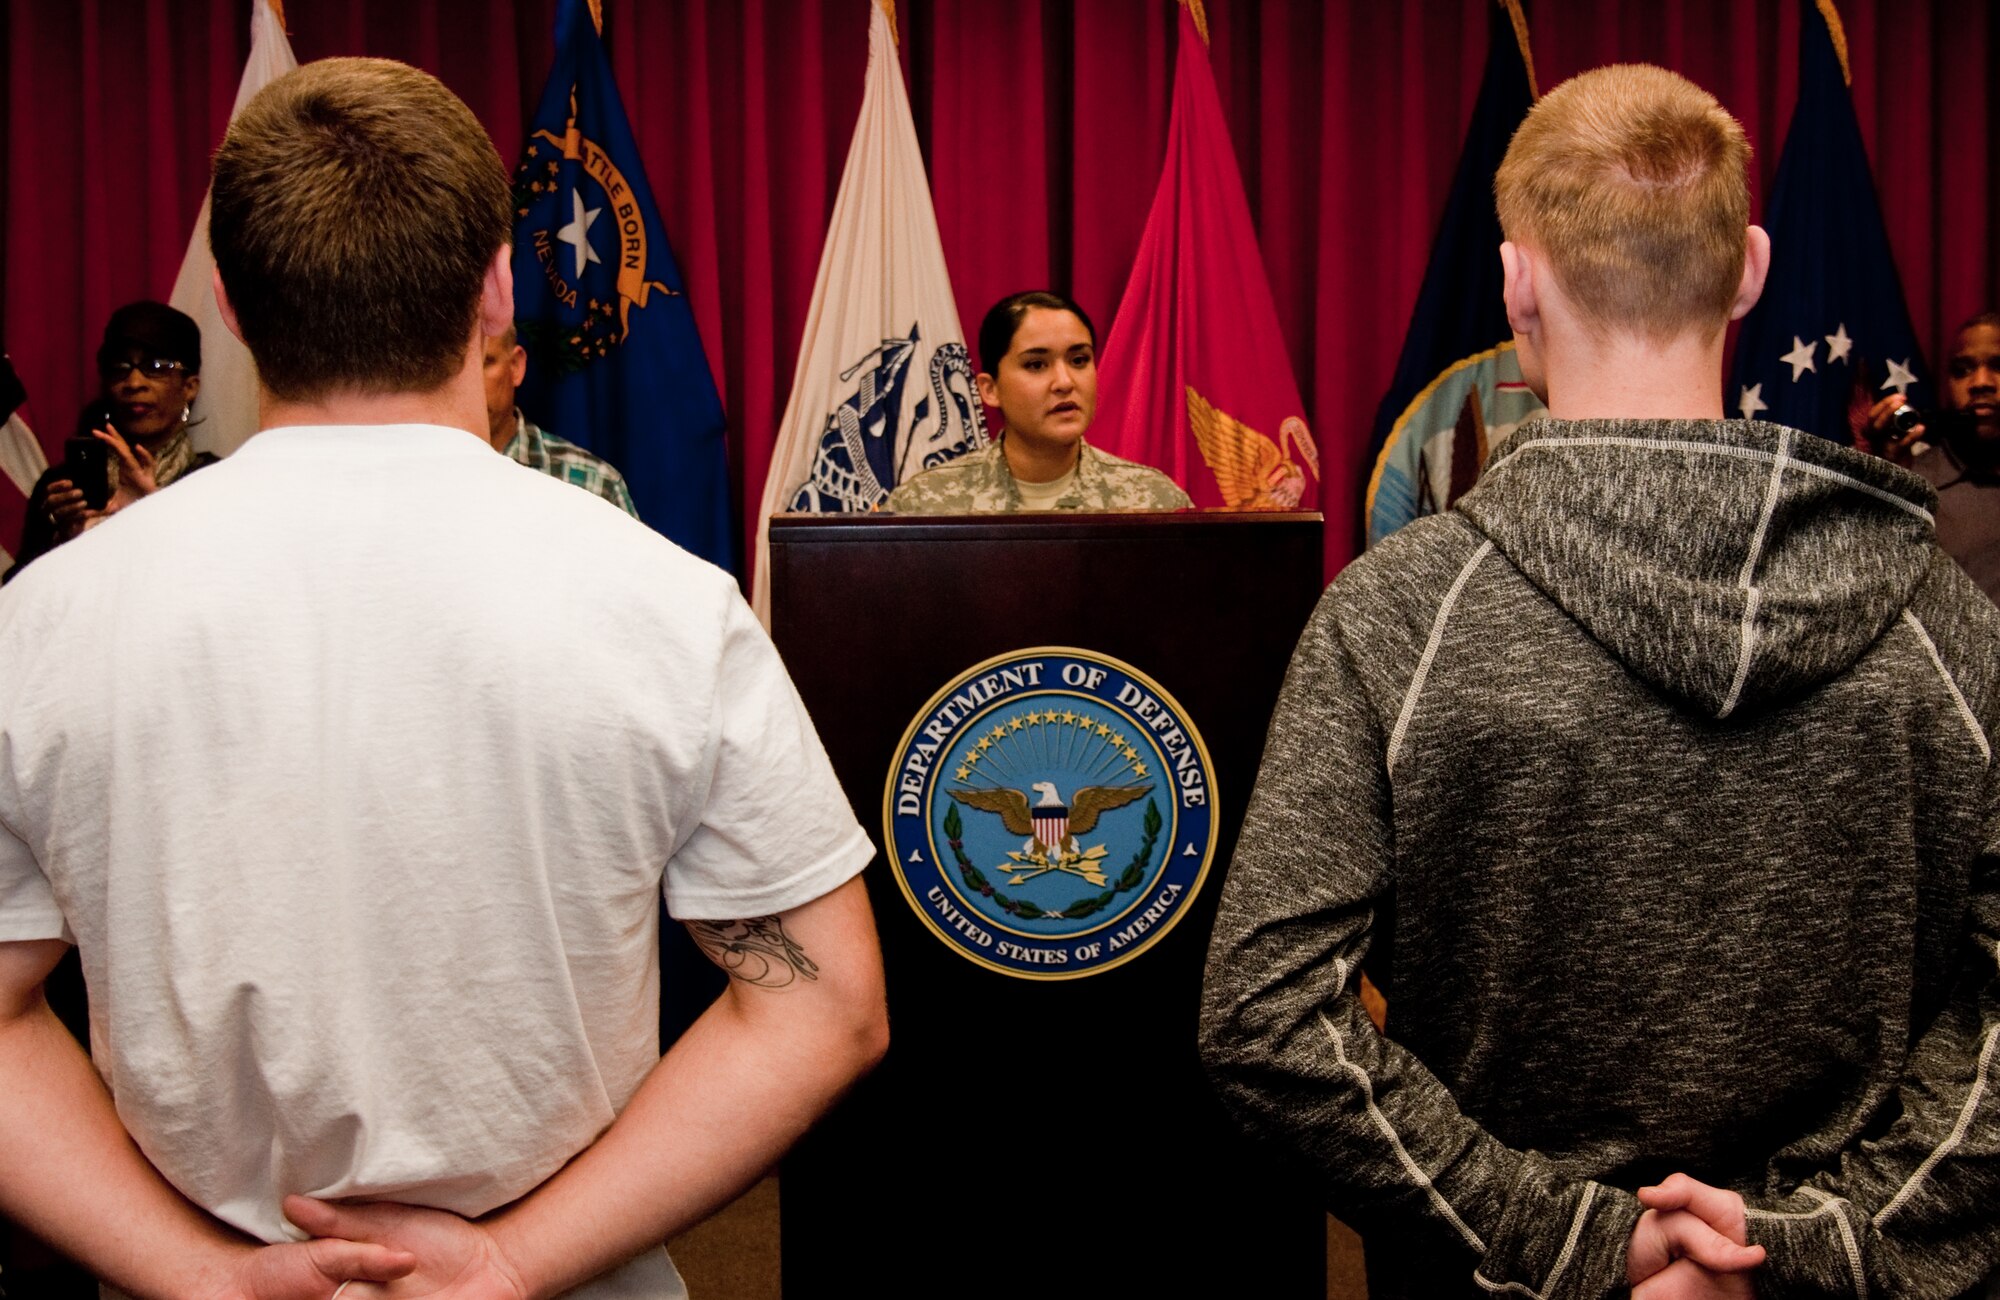 Two military applicants partake in the Oath of Enlistment April 1, 2014, at the Sacramento Military Entry Processing Station. Upon enlisting in the U.S. armed forces, each person whether a Soldier, Sailor, Coast Guardsman, Airman or Marine takes an Oath of Enlistment. (U.S. Air Force photo by Senior Airman Charles V. Rivezzo)